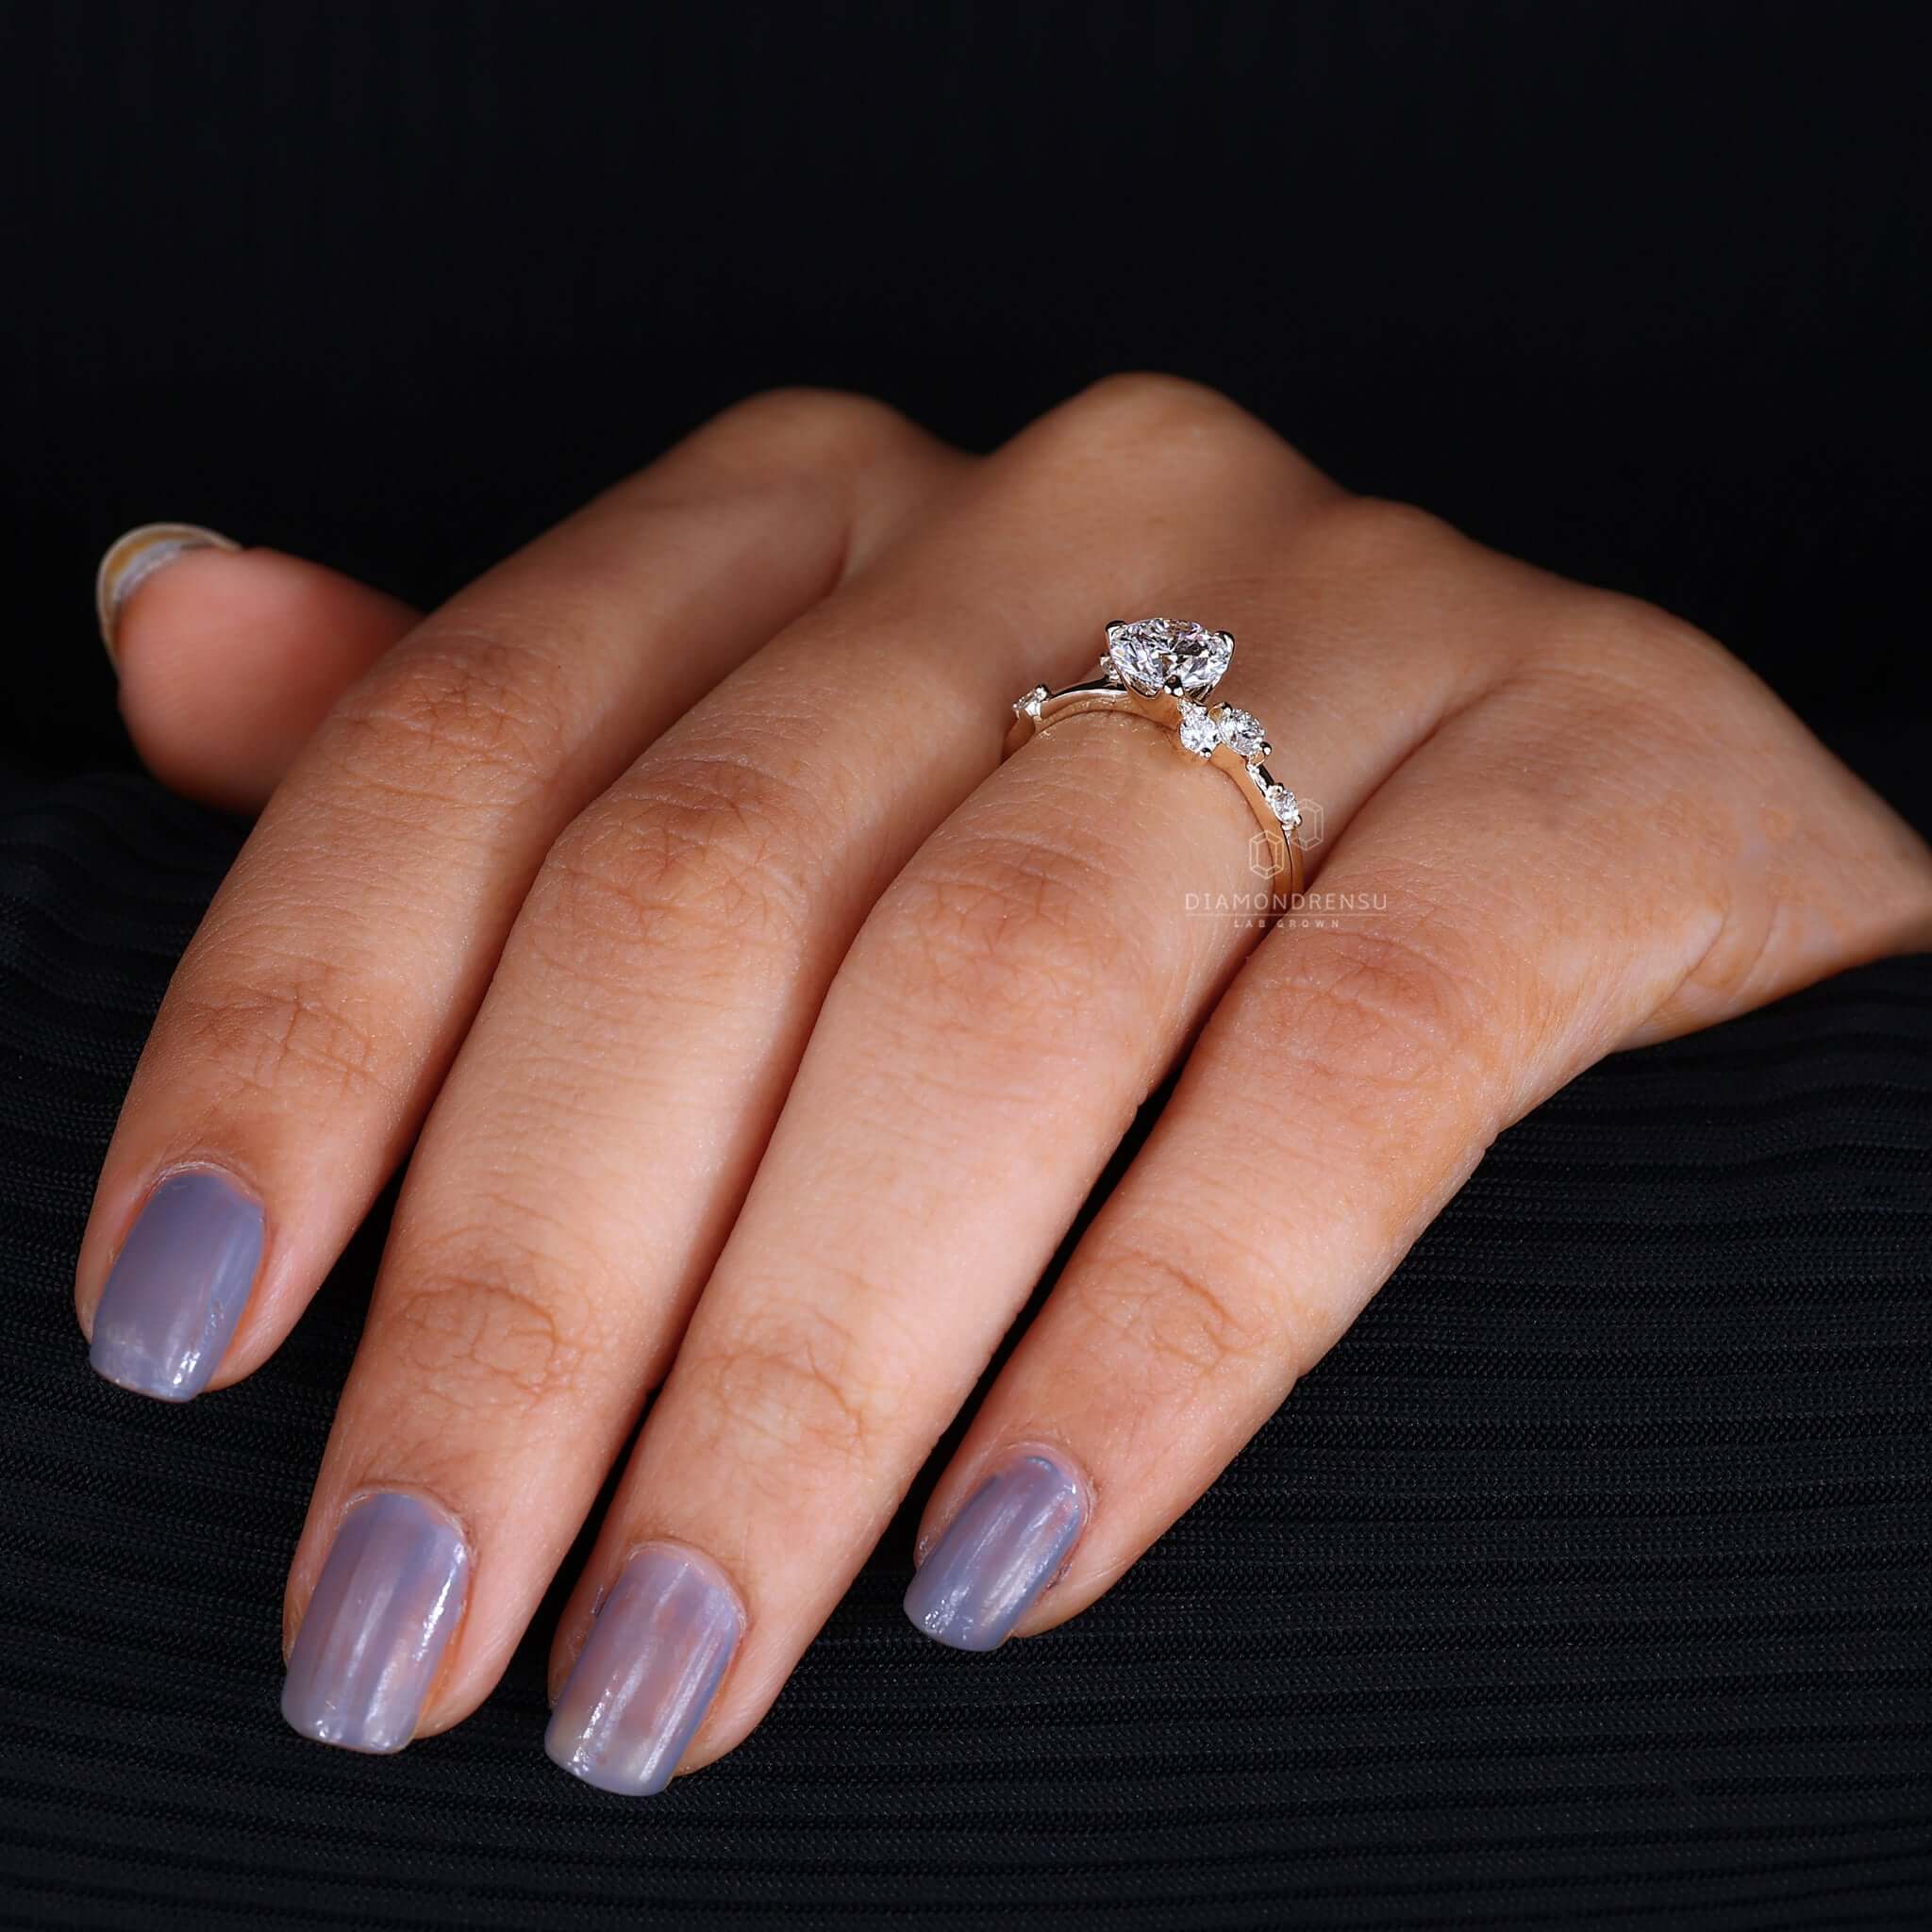 Innovative diamond bubble ring on hand, blending contemporary style with classic diamond beauty.